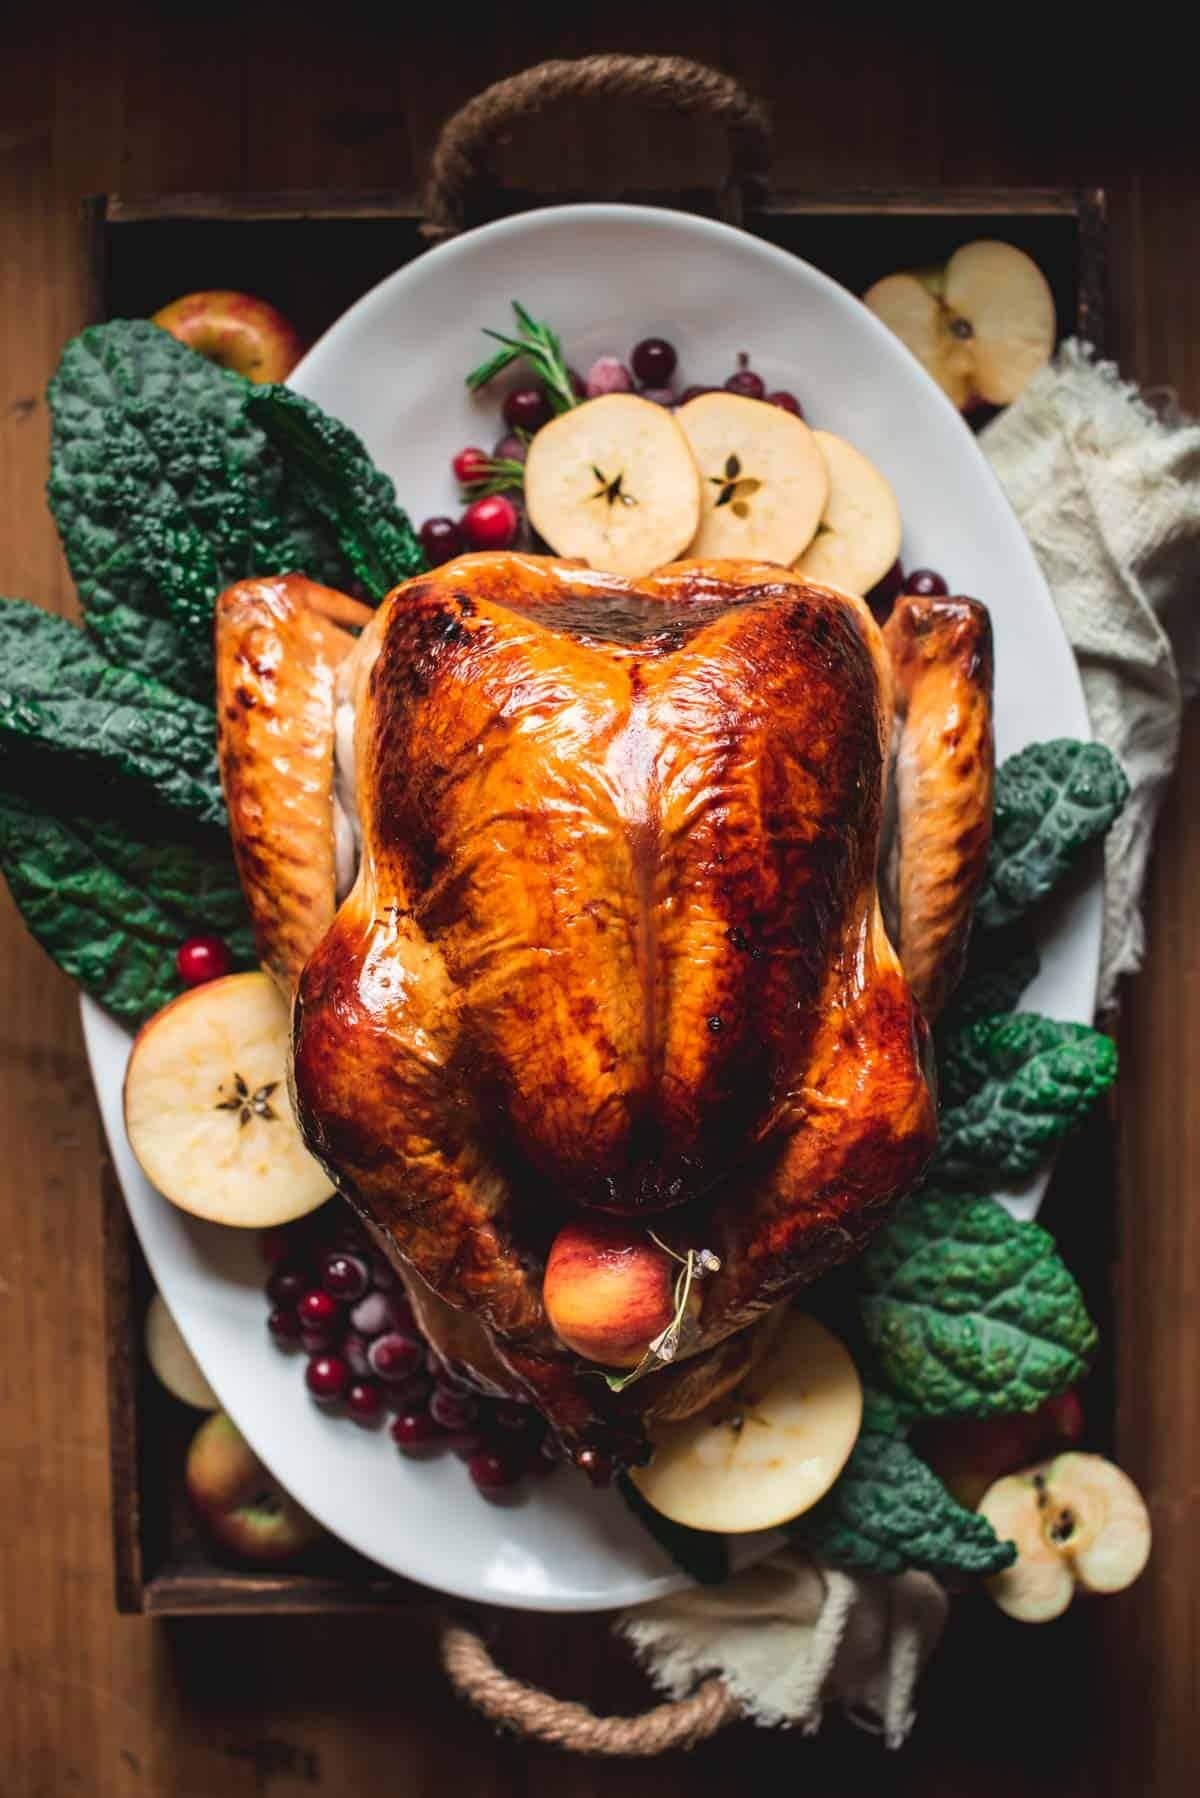 Roasted whole turkey served with apple slices, cranberries and a bed of green leaves.  